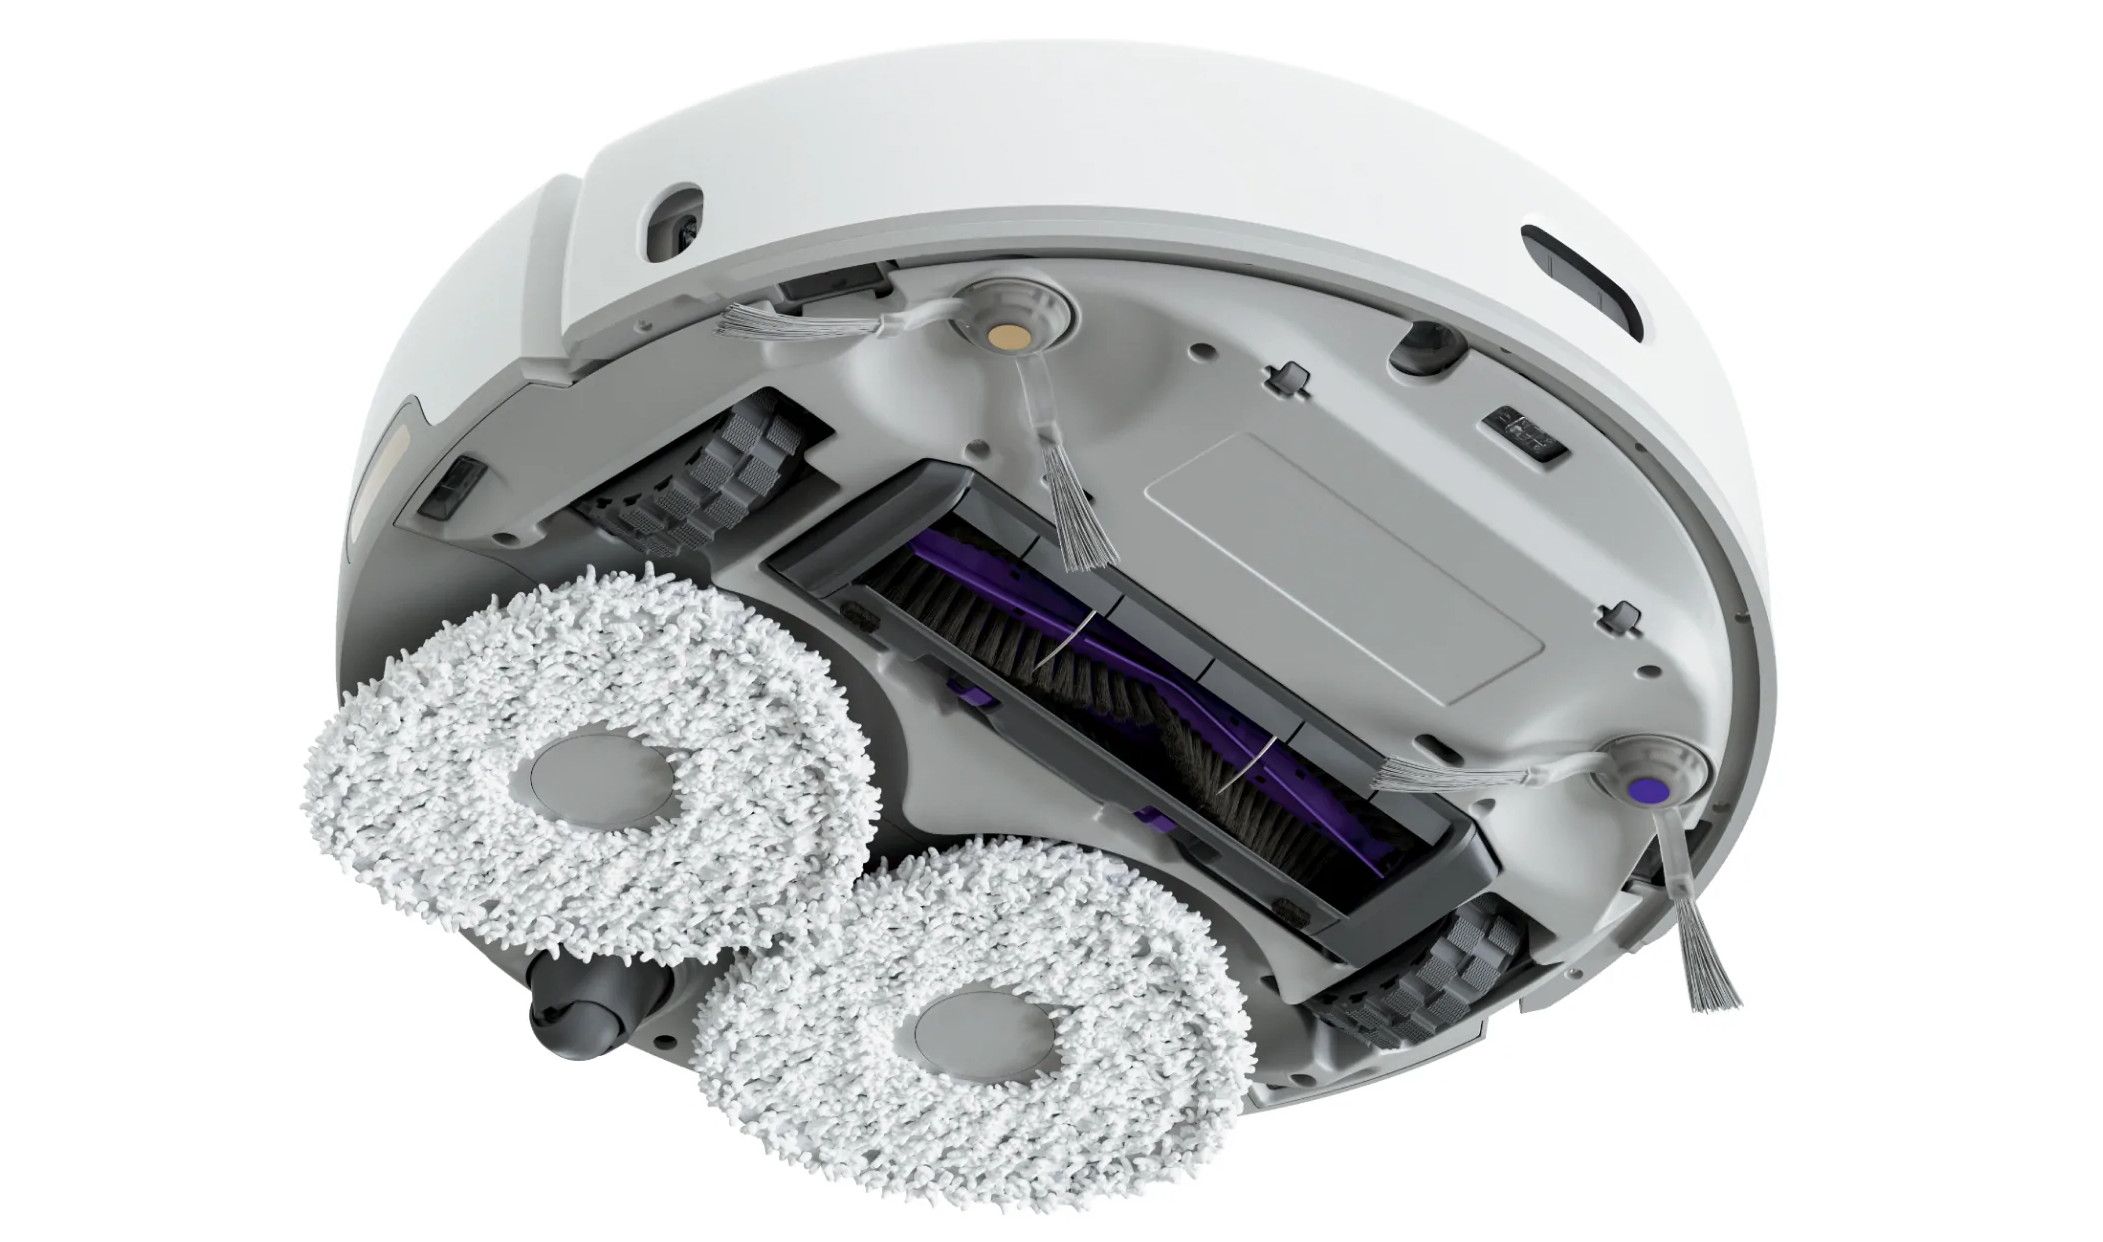 What’s New in the Narwal Freo Robot Vacuum & Mop